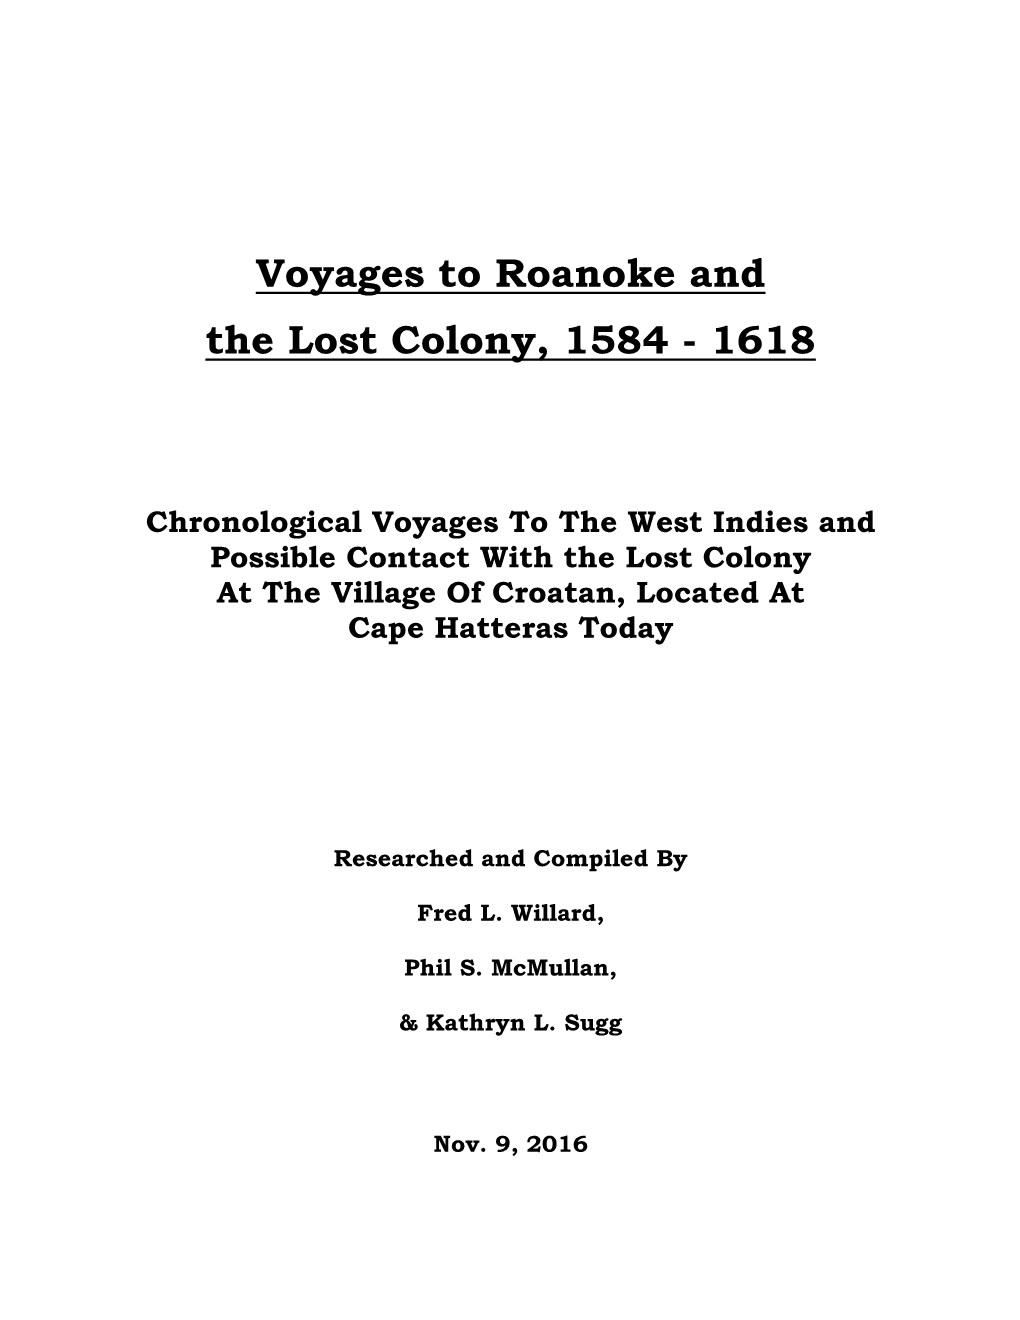 Voyages to Roanoke and the Lost Colony, 1584 - 1618